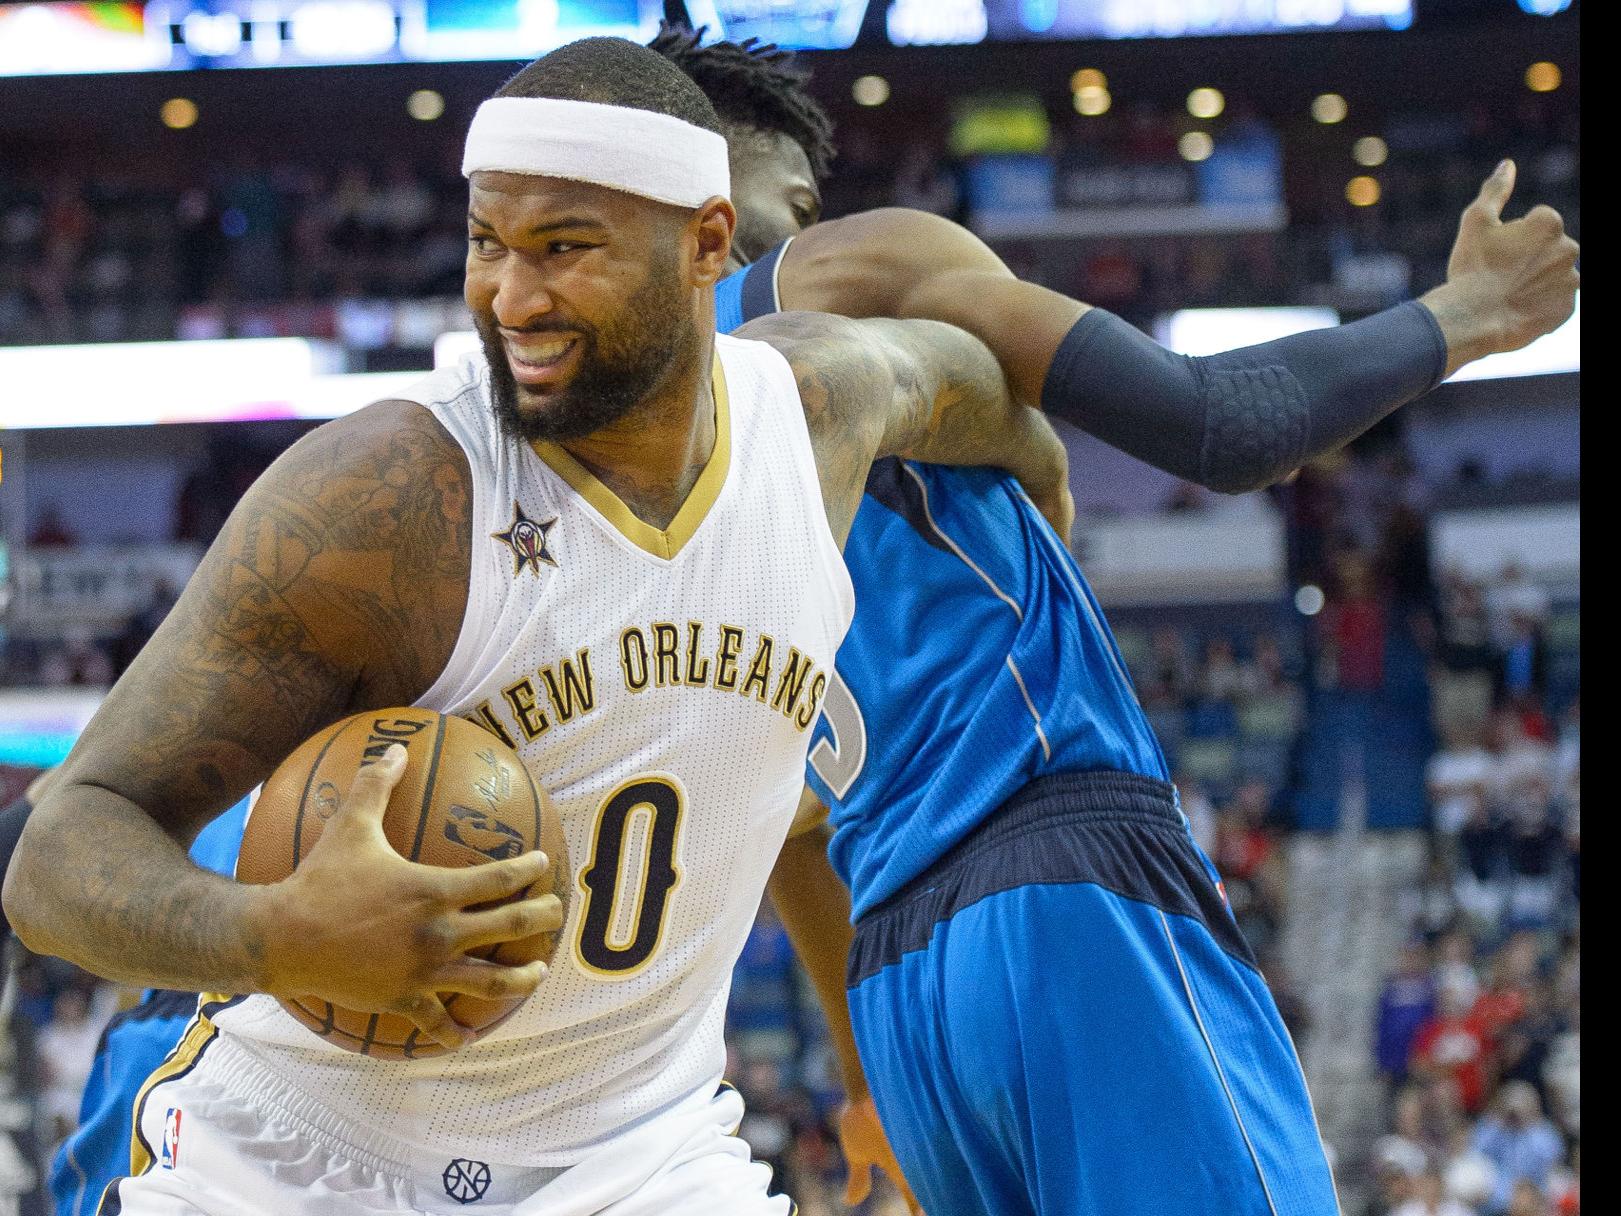 Anthony Davis on DeMarcus Cousins right before trade: 'He's a great player